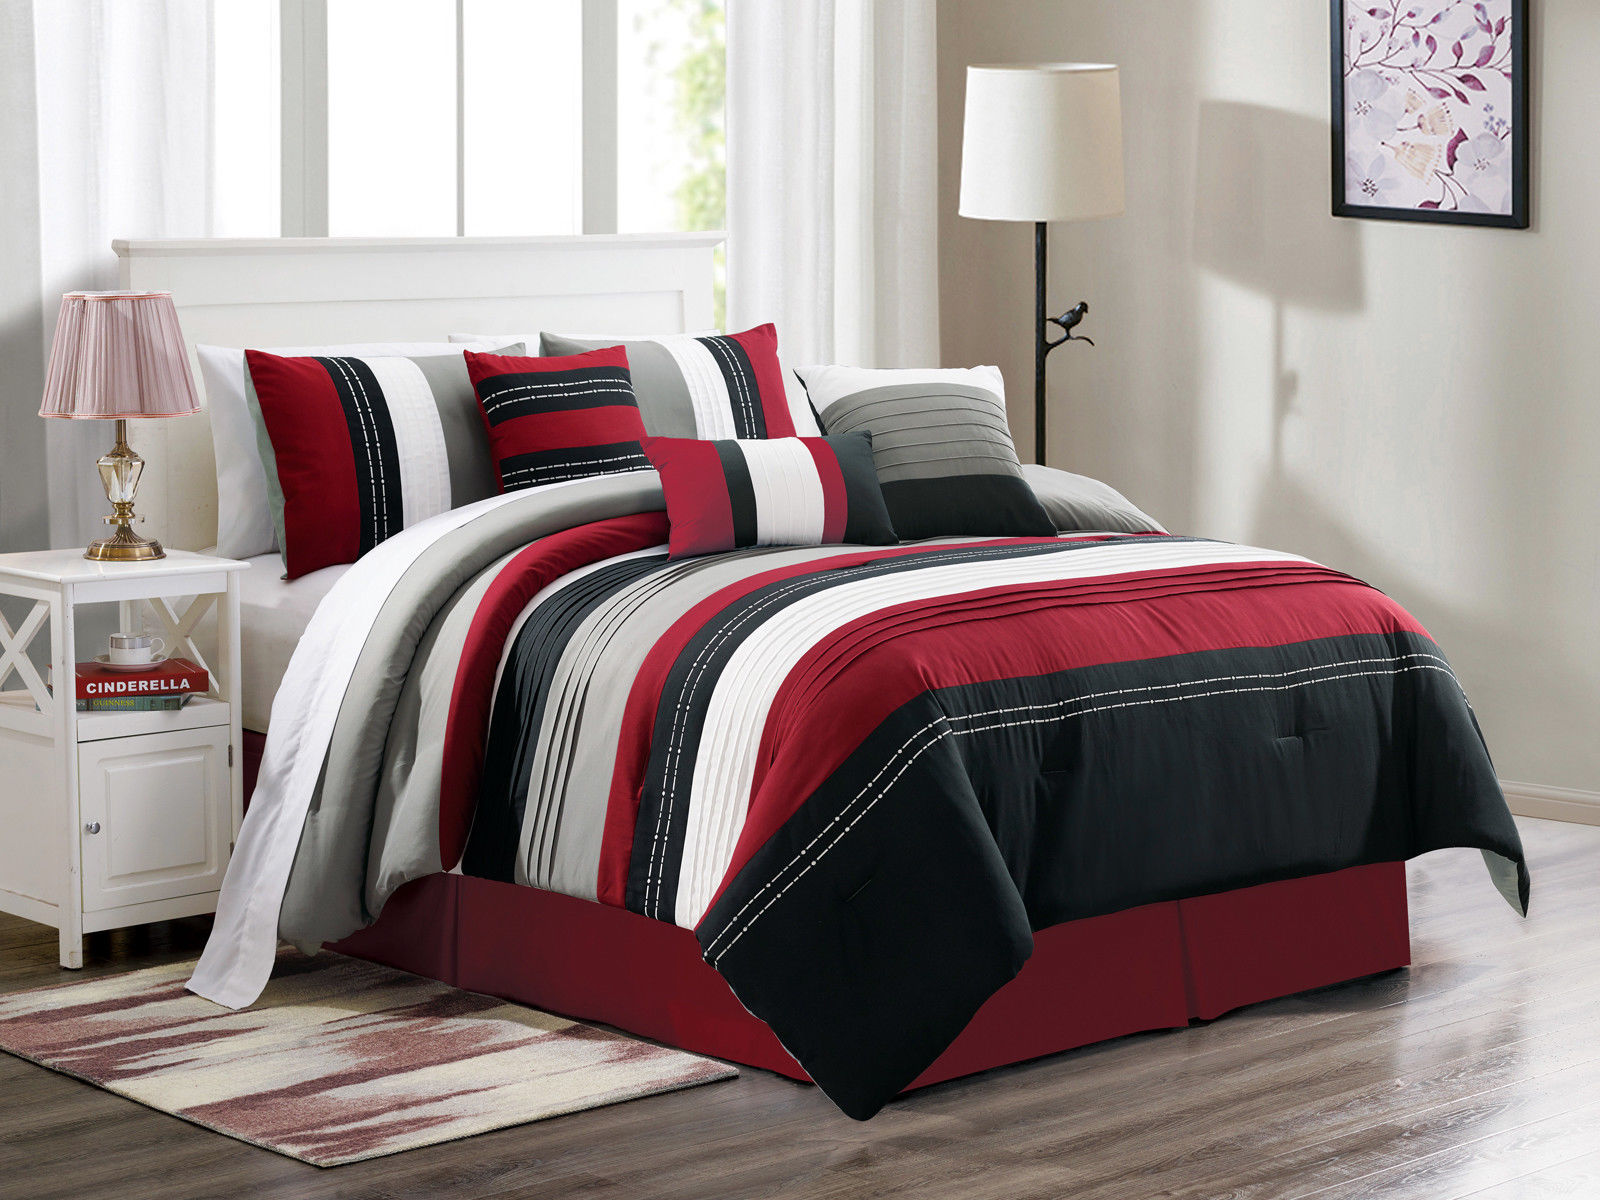 Wayfair Bedding Sets With Curtains